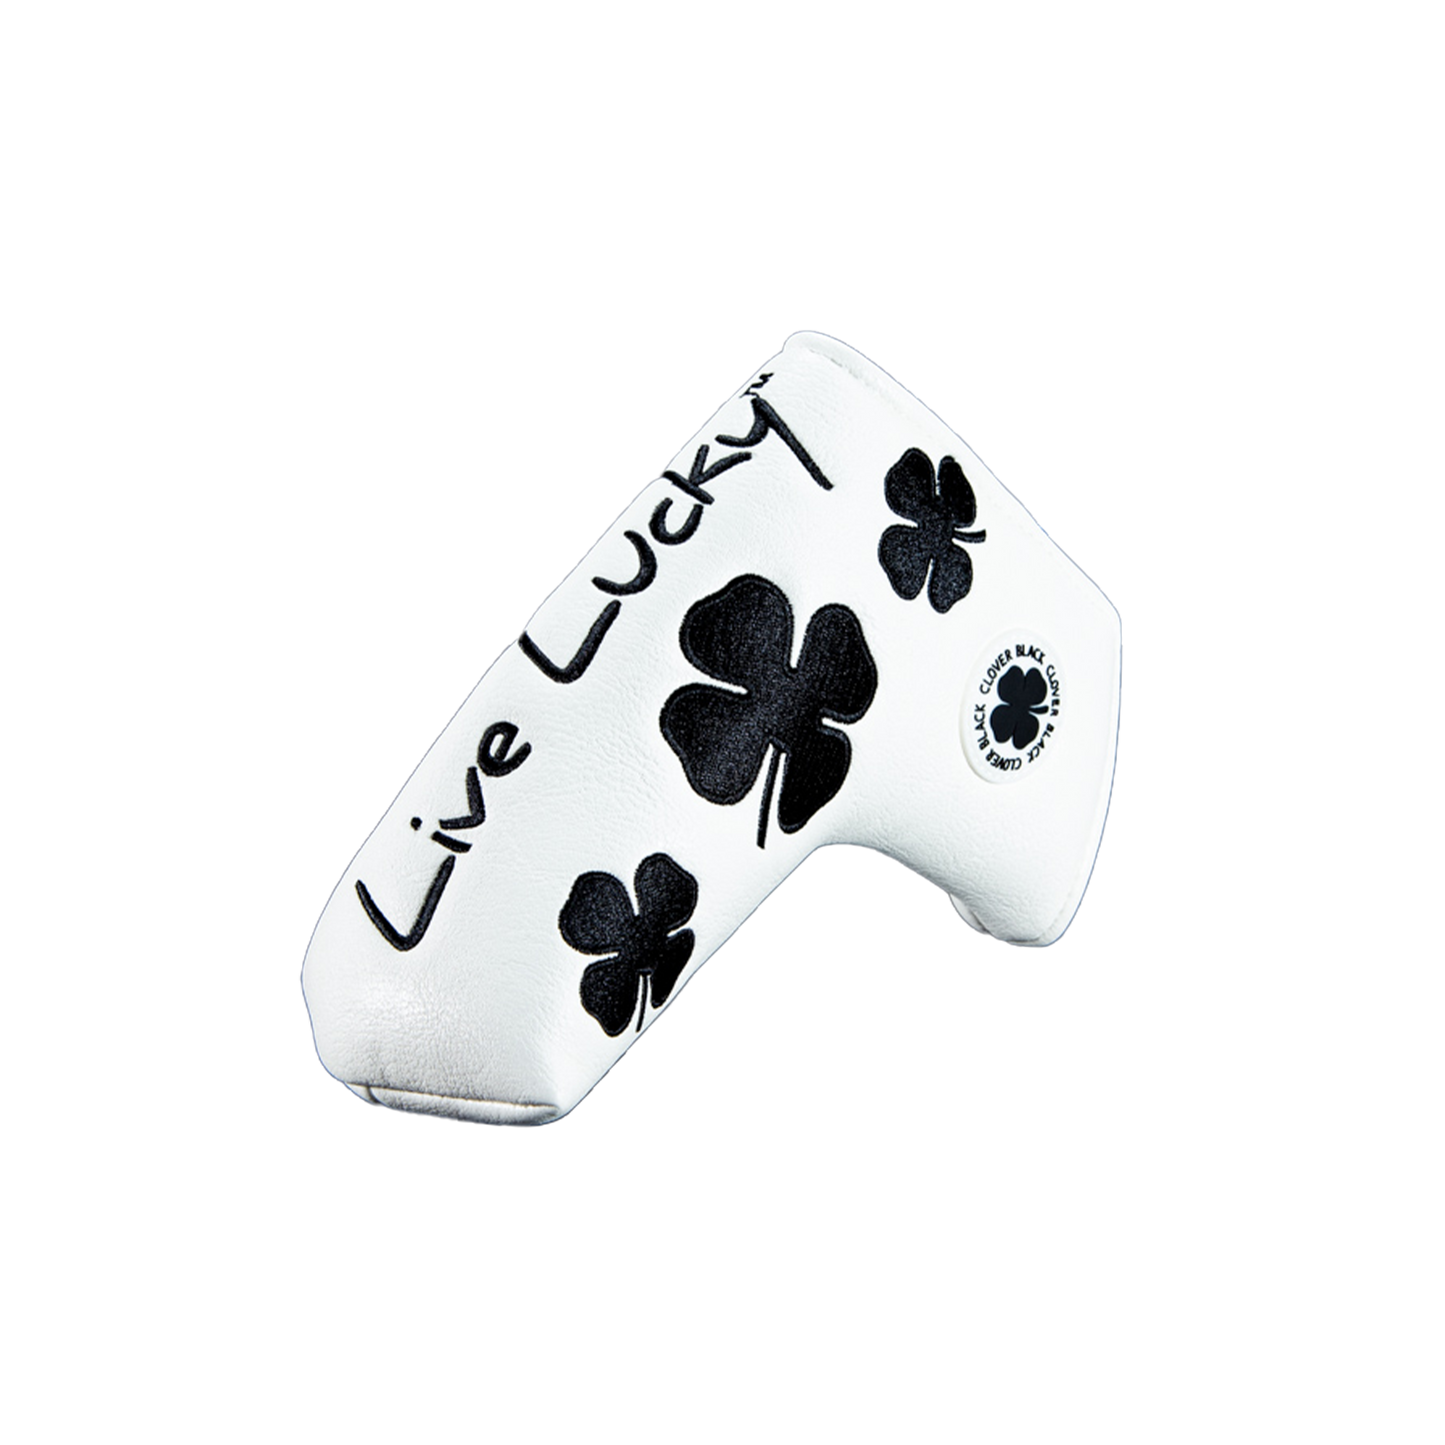 Live Lucky "Poker" Blade Putter Cover